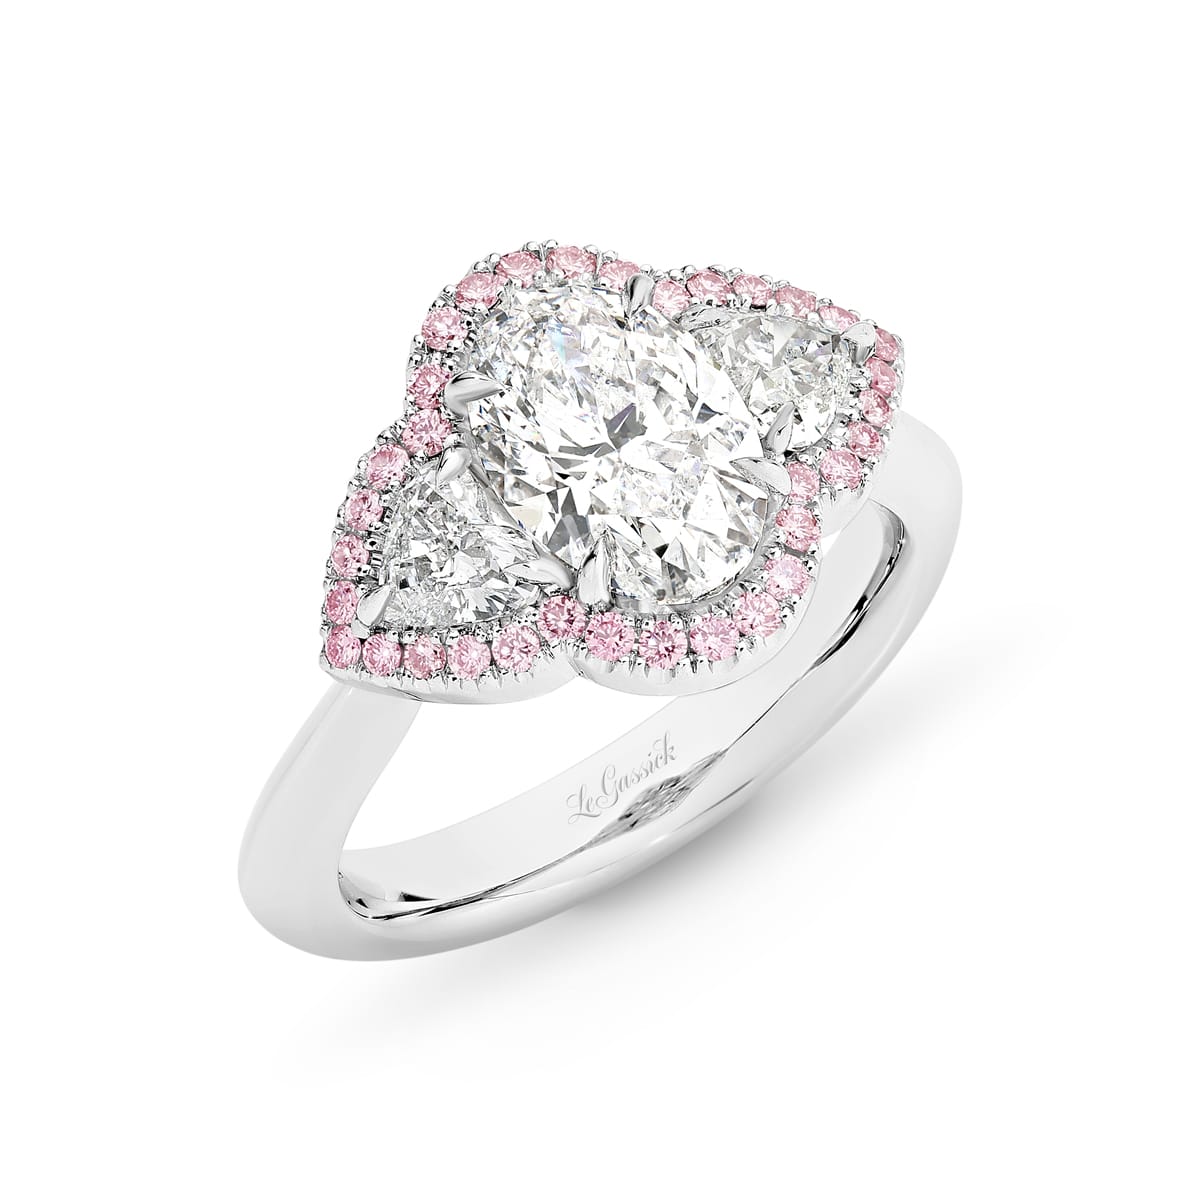 Briannah has a 2-carat oval centre diamond with a pair of heart-shaped diamonds and pink diamonds created by LeGassick Diamonds and Jewellery Gold Coast, Australia